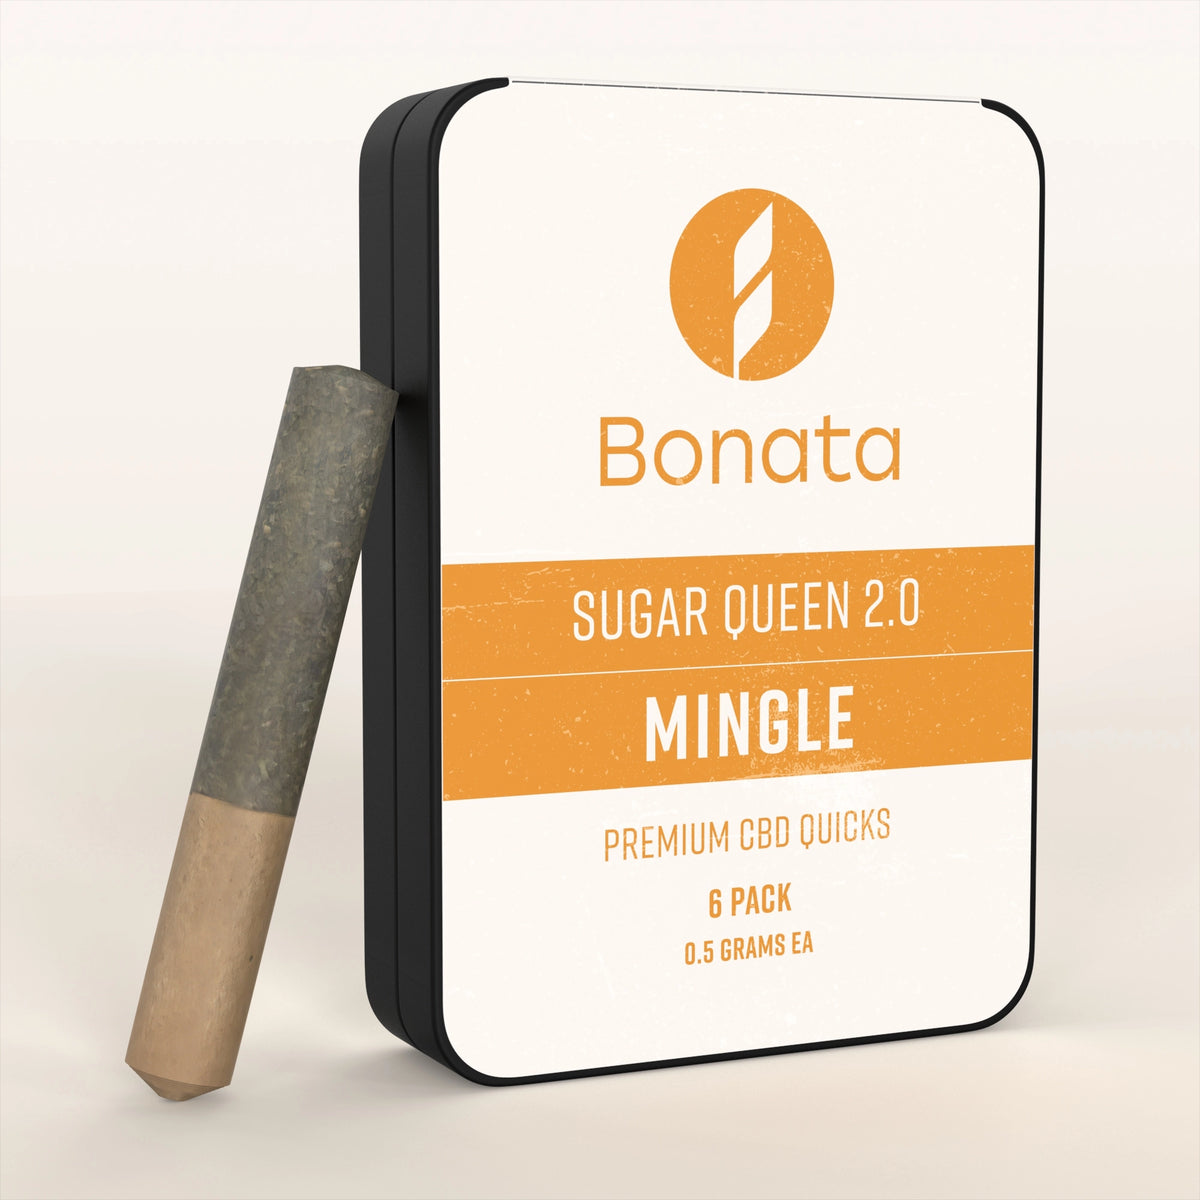 Sugar Queen CBD Cigarettes with hand trimmed indoor grown CBD flower and contains no tobacco or nicotine just CBD flower